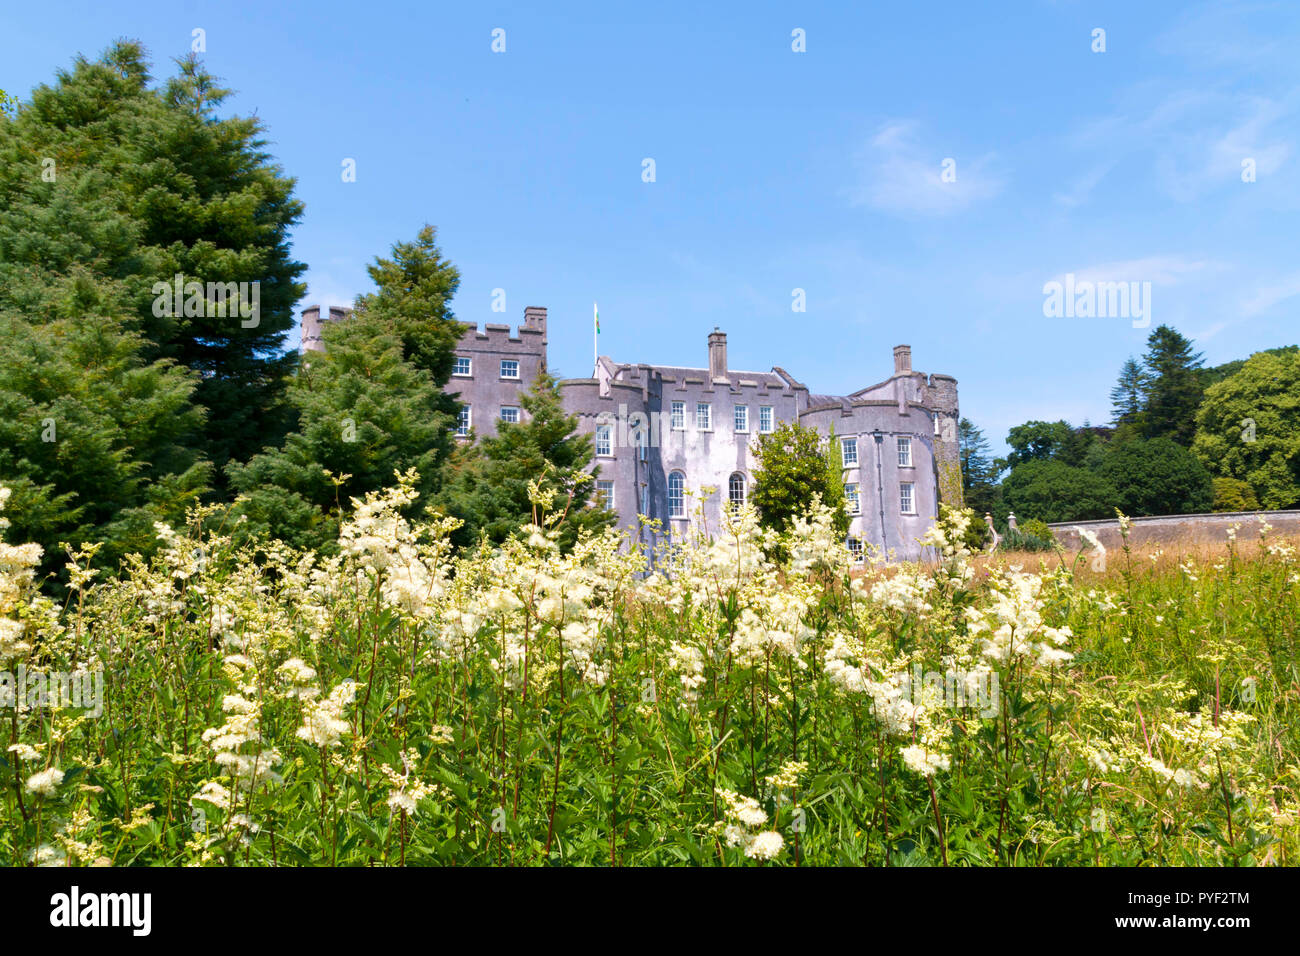 The exterior of Picton Castle, near Haverfordwest, Pembrokeshire, West Wales, UK Stock Photo